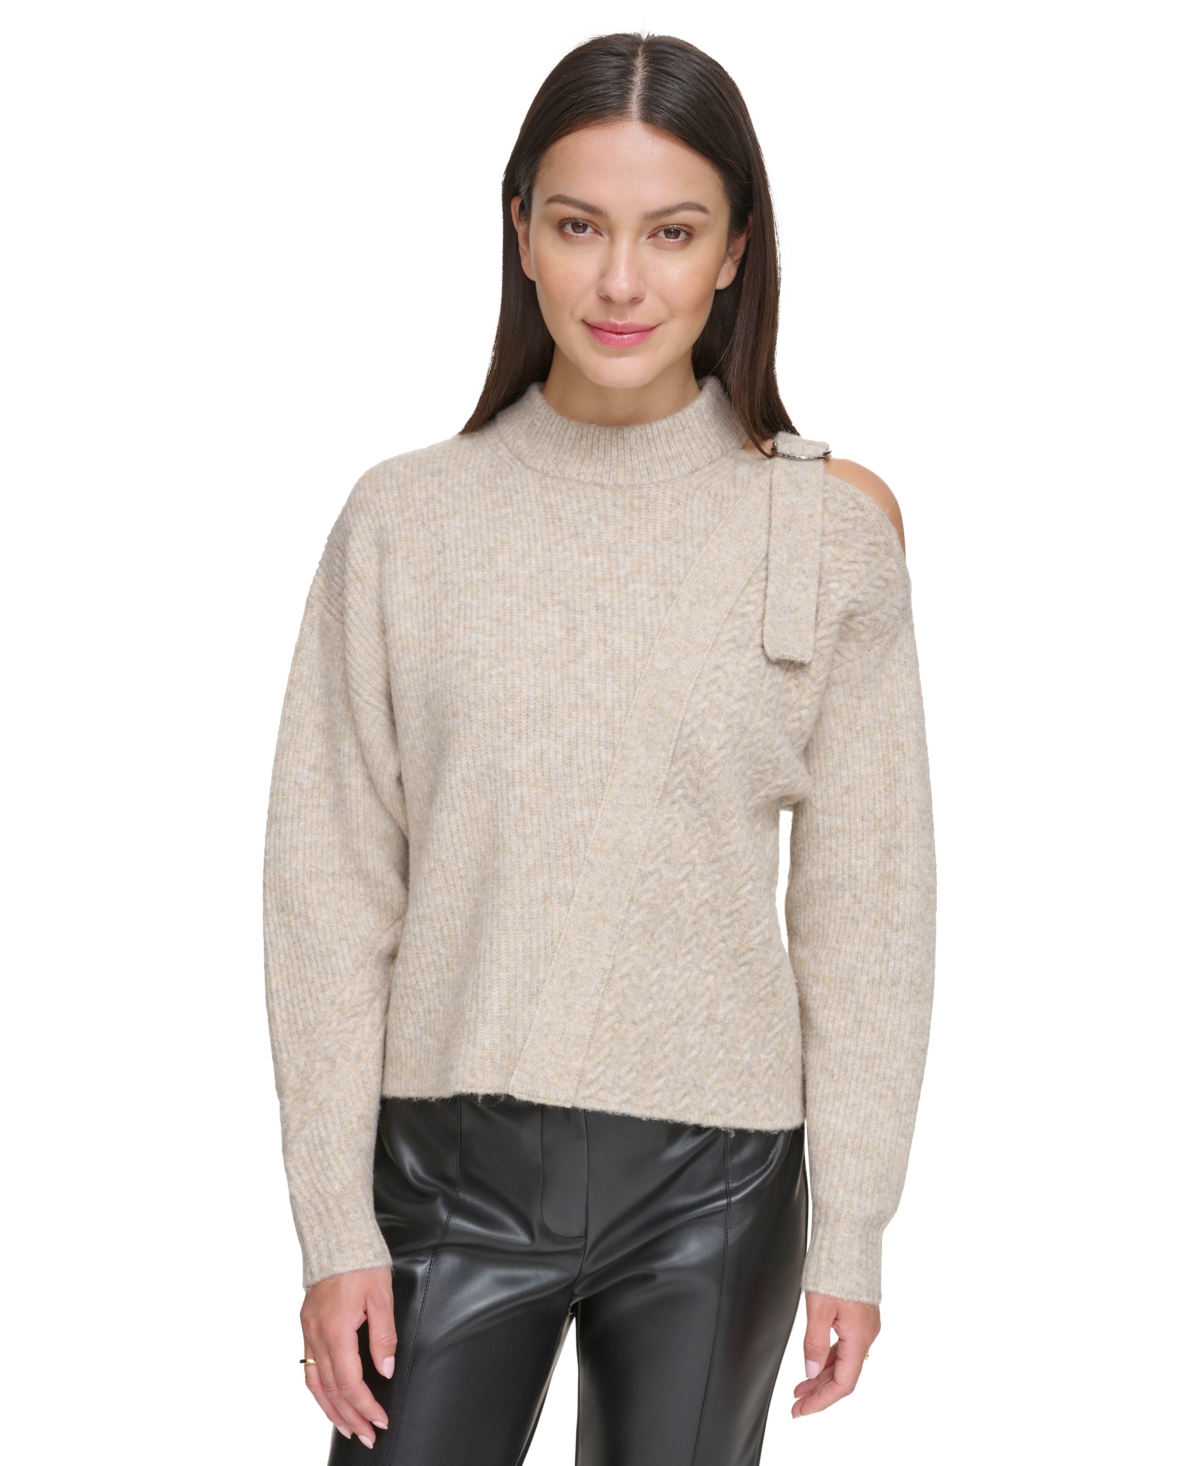 DKNY WOMEN'S MIXED-STITCH COLD-SHOULDER SWEATER